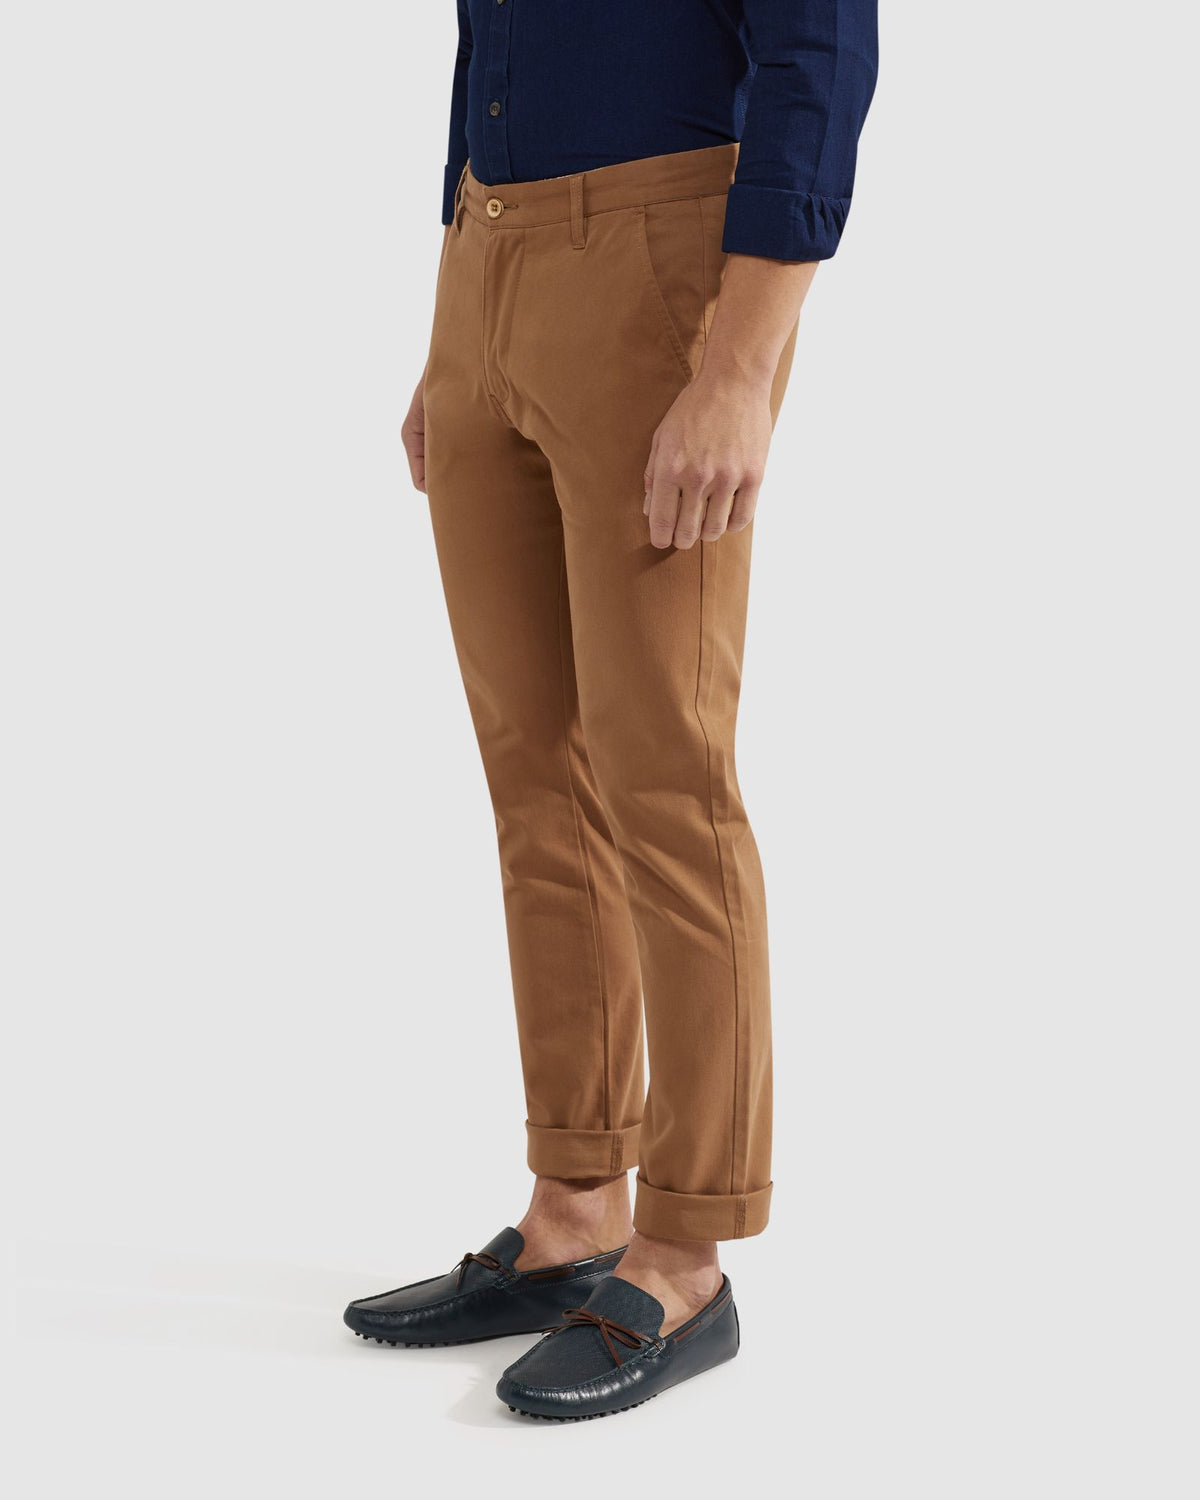 STRETCH SKINNY FIT ORGANIC COTTON CHINOS - AVAILABLE ~ 1-2 weeks MENS TROUSERS